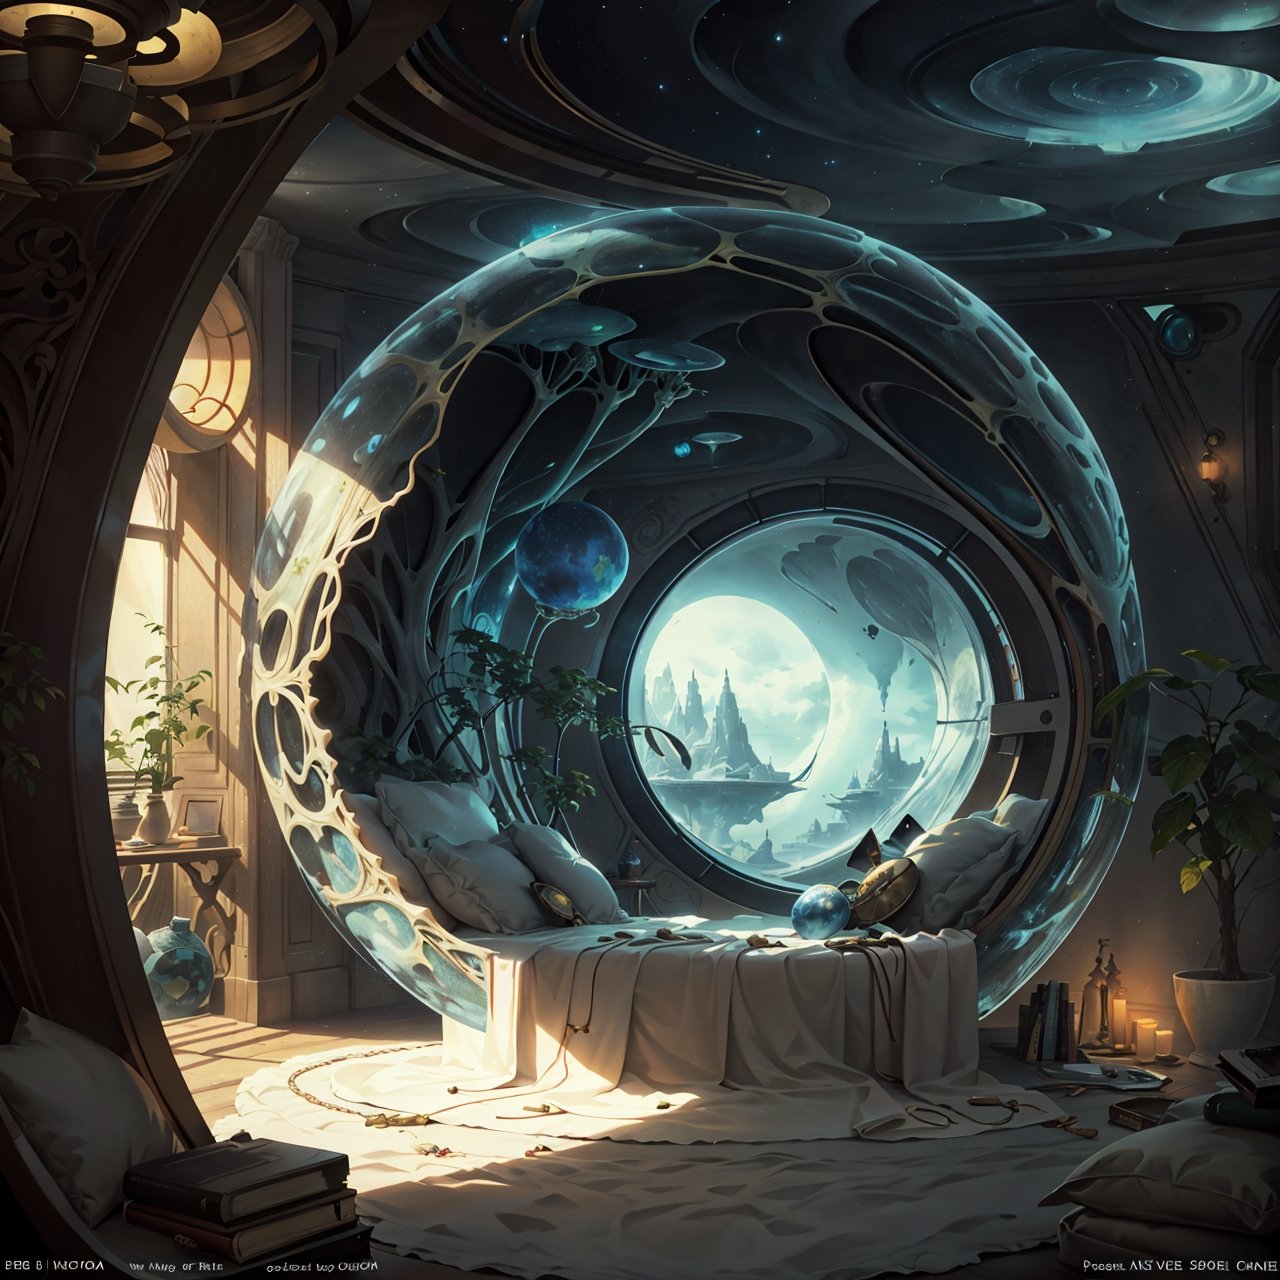 indoors, (alcove_bed, alcove), cozy room, round window with a view of an alien landscape, art nouveau, fantasy, scifi, cosmiclandscapes, starry sky, alien plants,